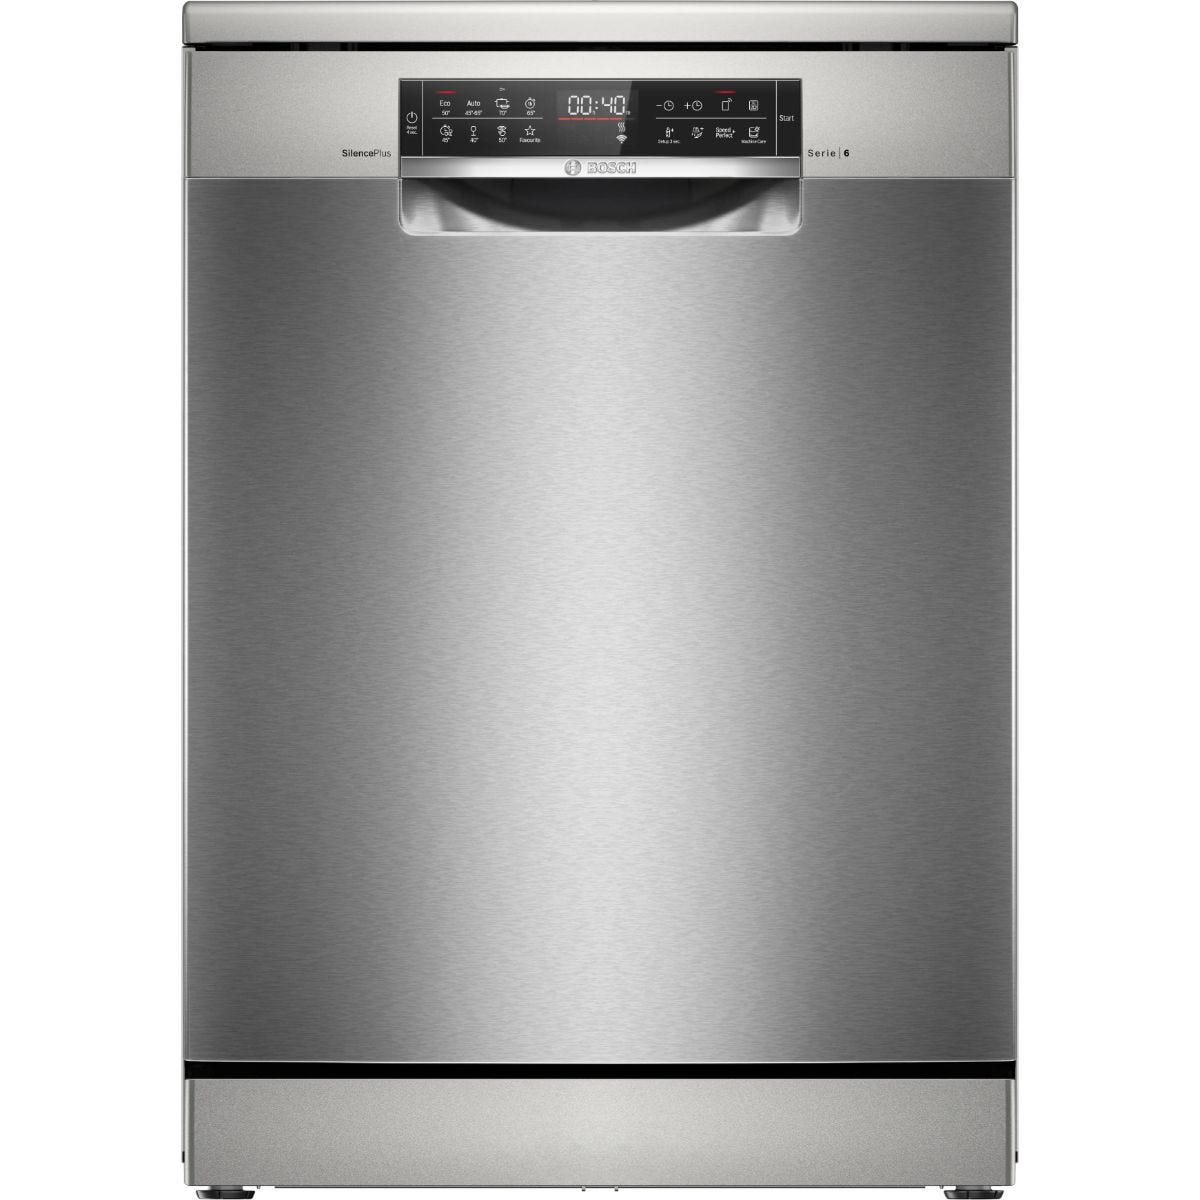 Dishwasher - 60 cm - 13 persons - stainless steel